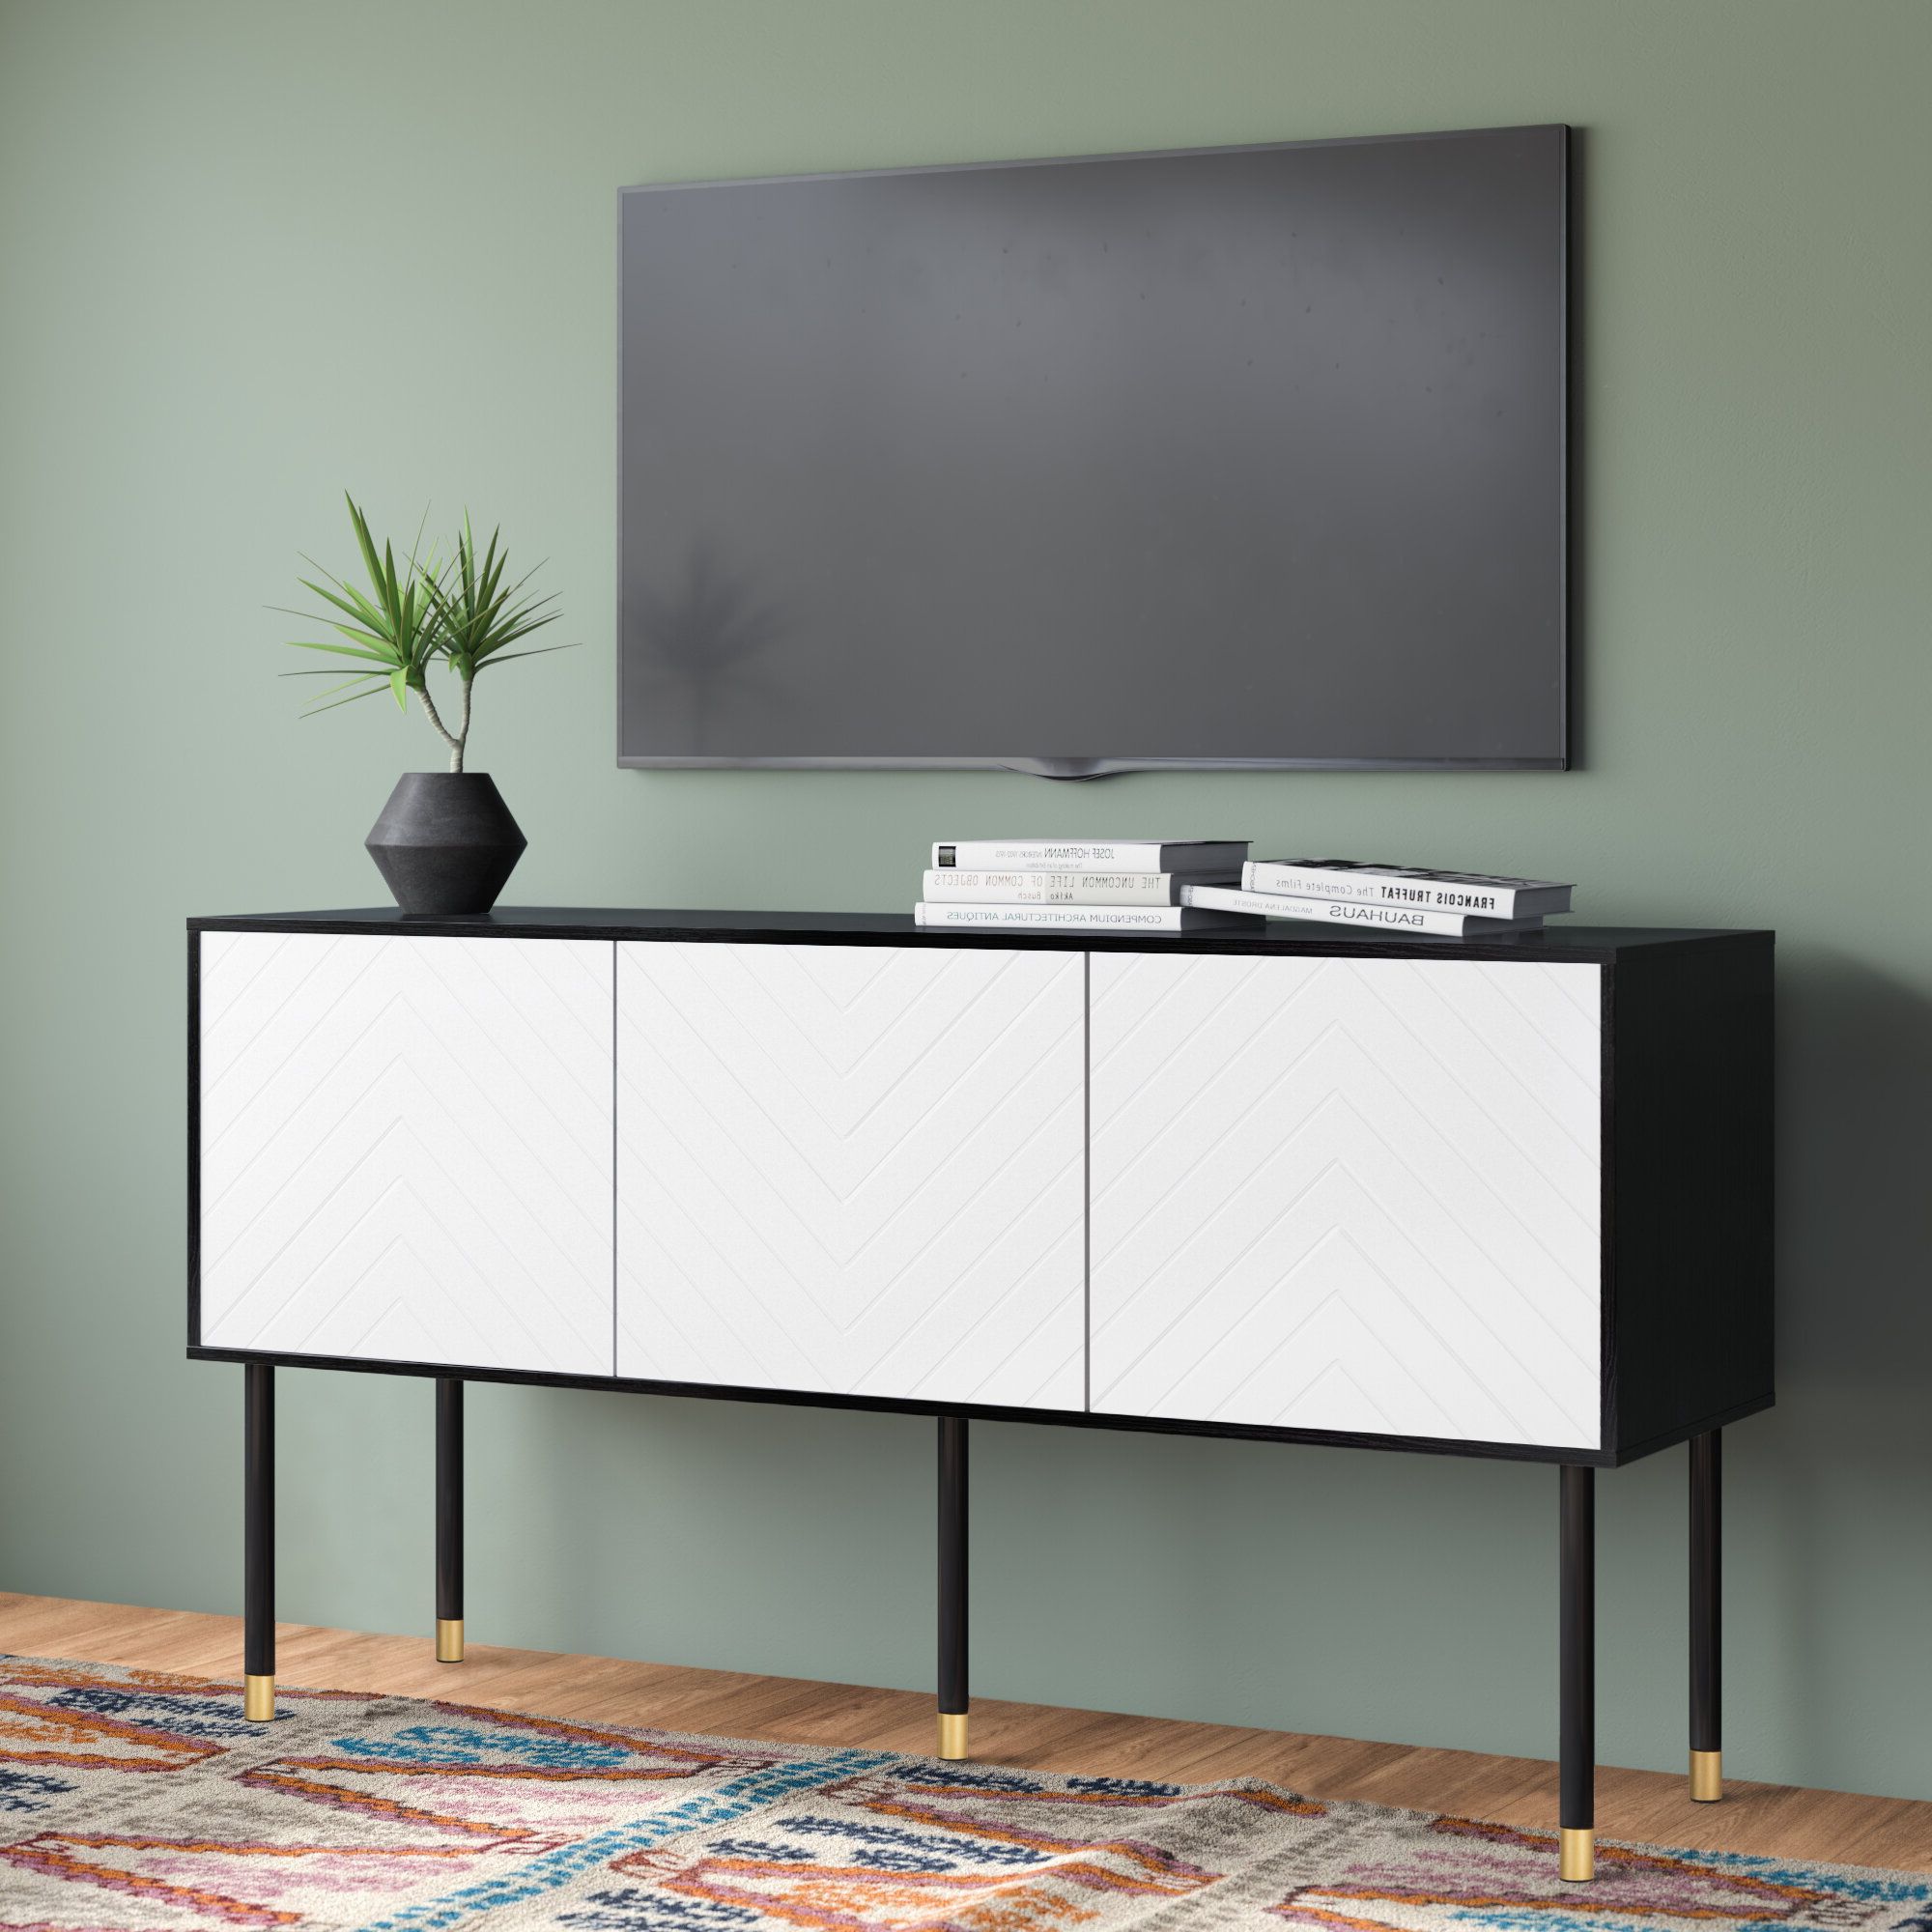 Wrought Studio Oakley 55.1'' Media Console & Reviews | Wayfair For Oaklee Tv Stands (Gallery 12 of 20)